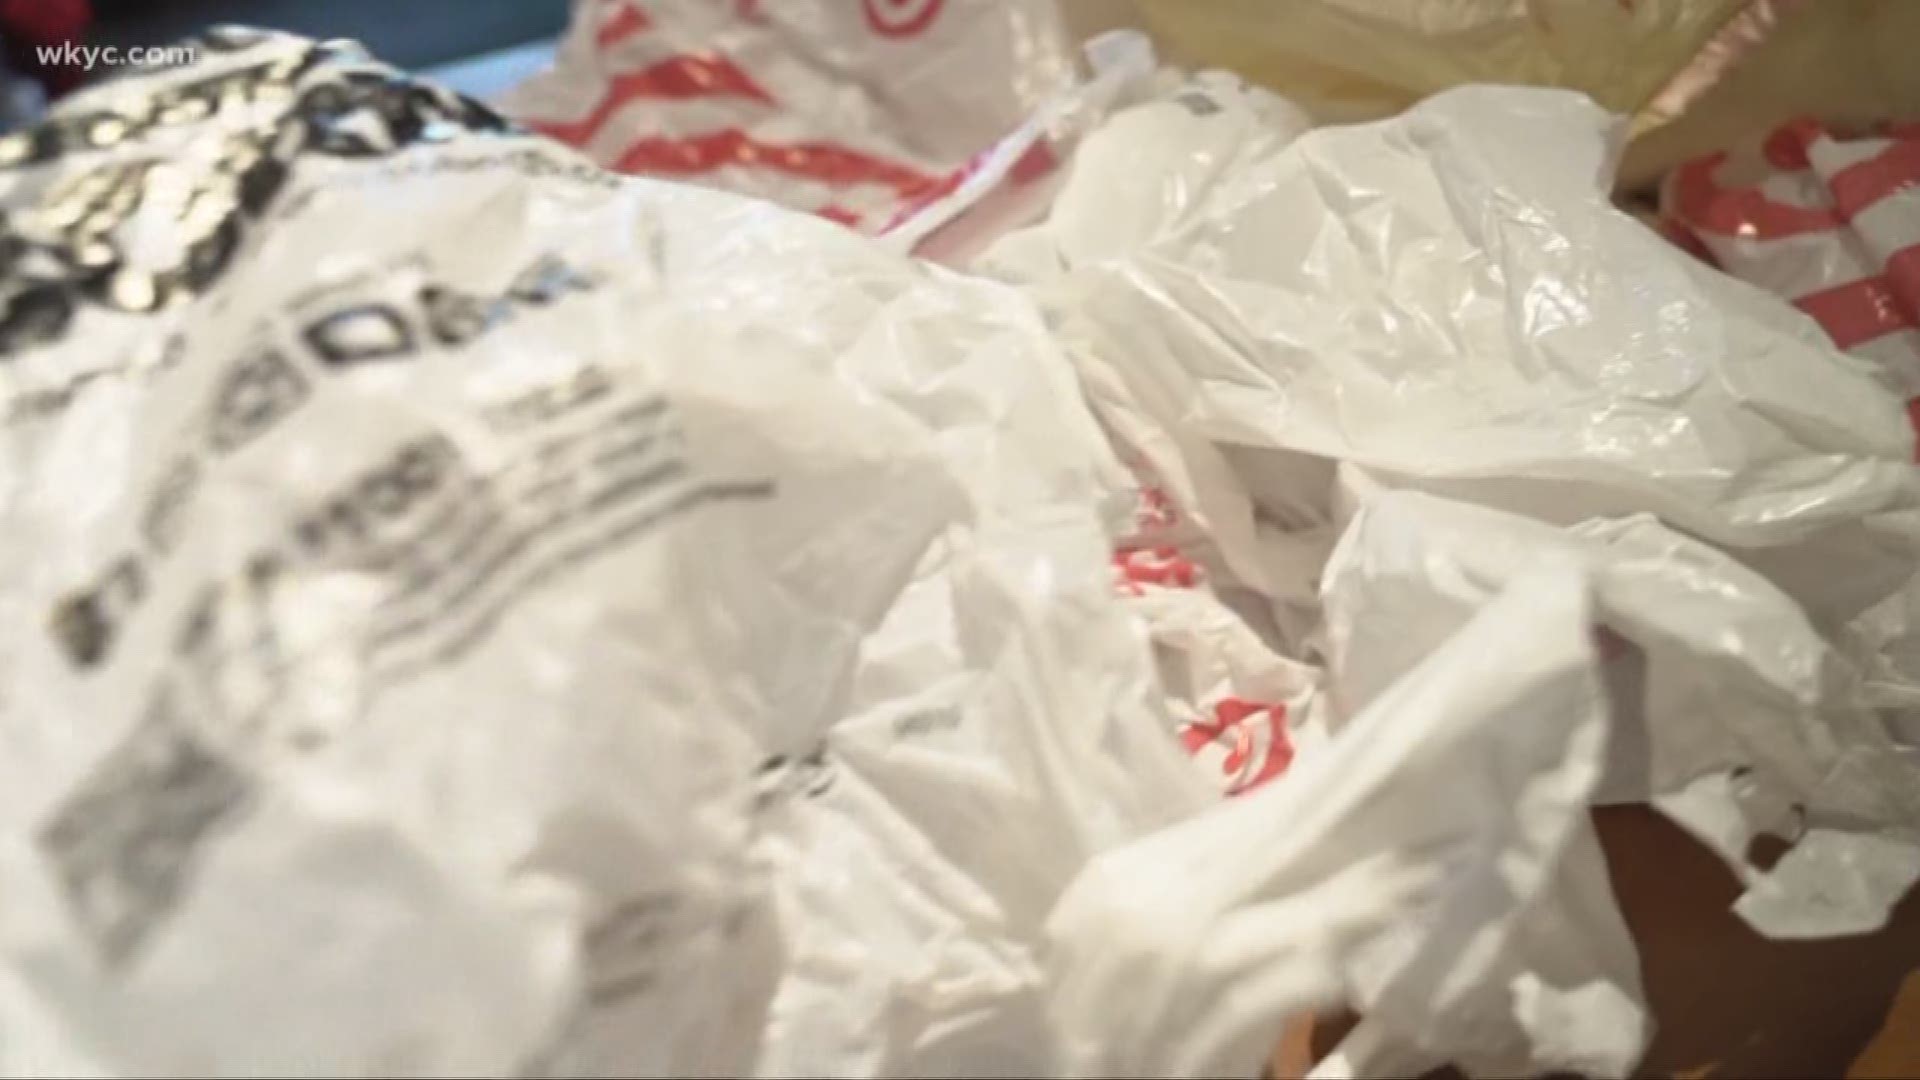 Could proposed Cuyahoga County plastic ban backfire?